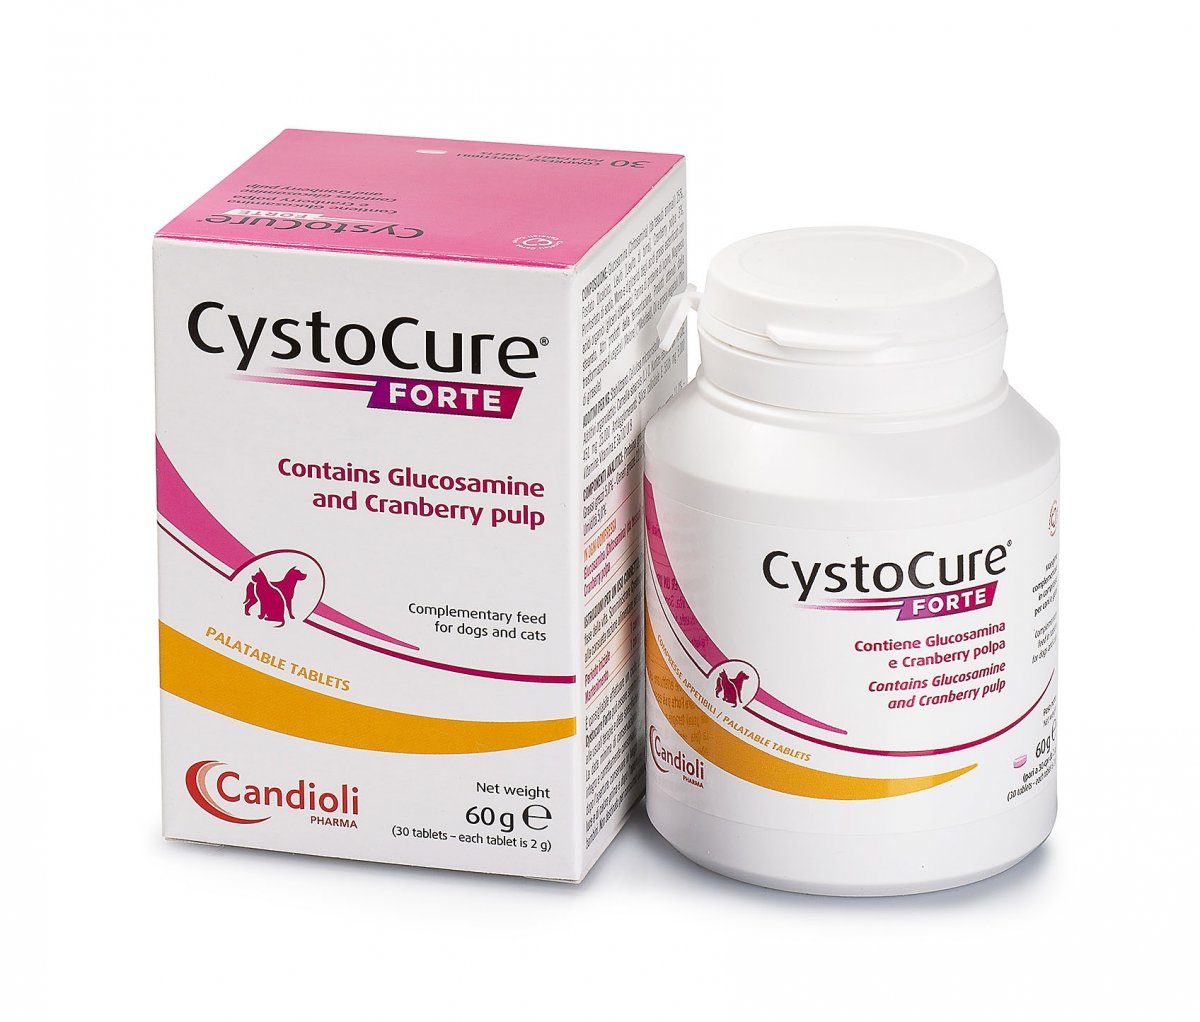 Cystocure Forte tablets